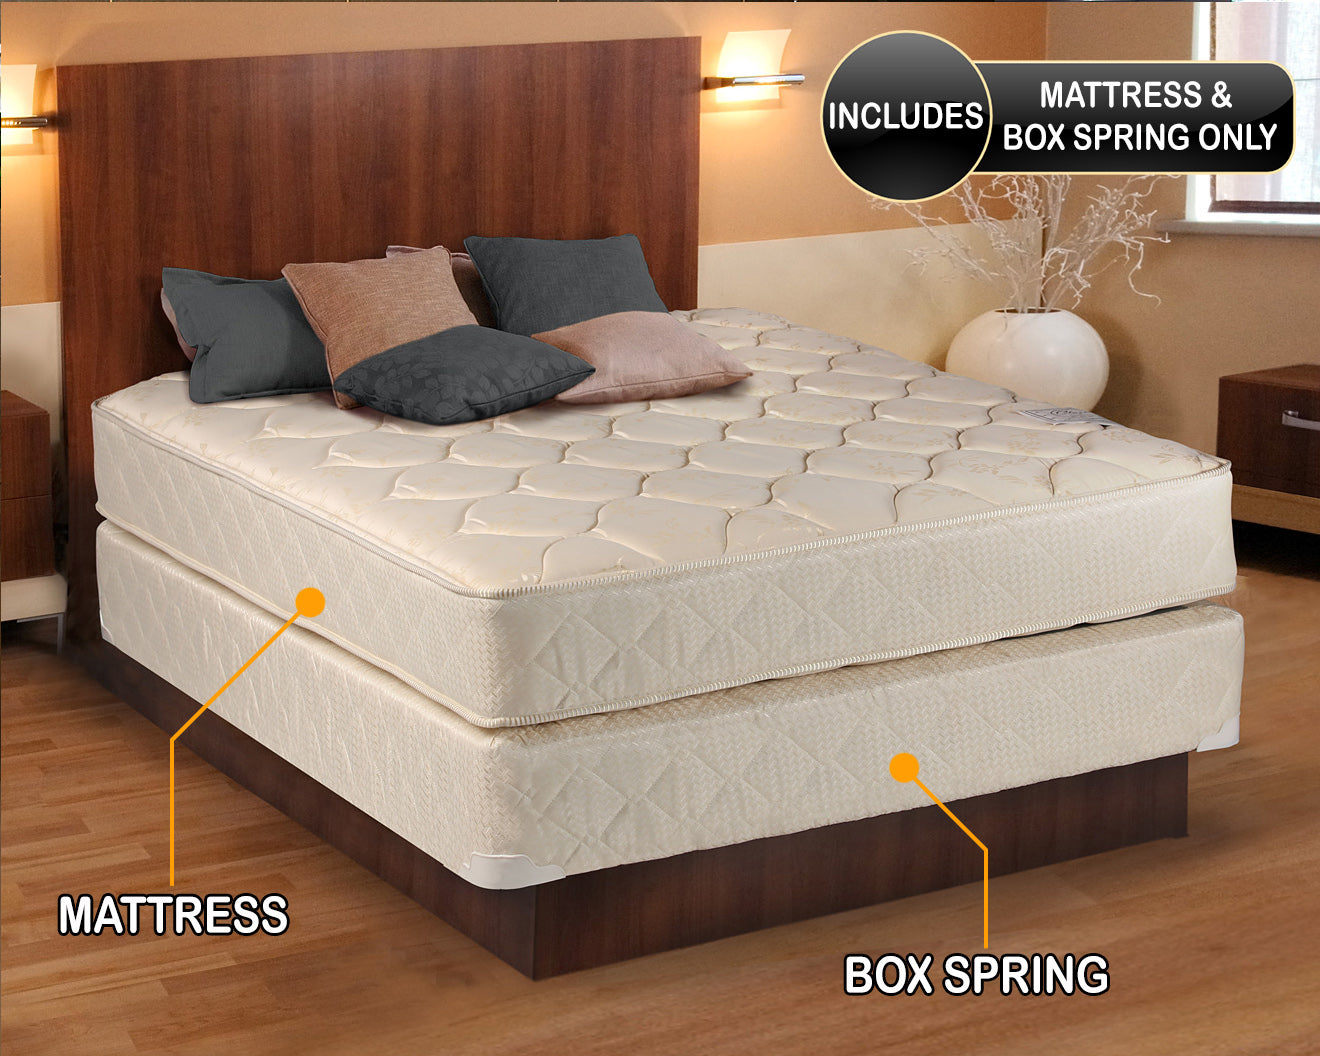 Comfort Classic Queen Size 2-Sided Gentle Firm Mattress and Box Spring Set - Spinal Support System, Fully Assembled, Orthopedic, Luxury Quality, Long Lasting Comfort